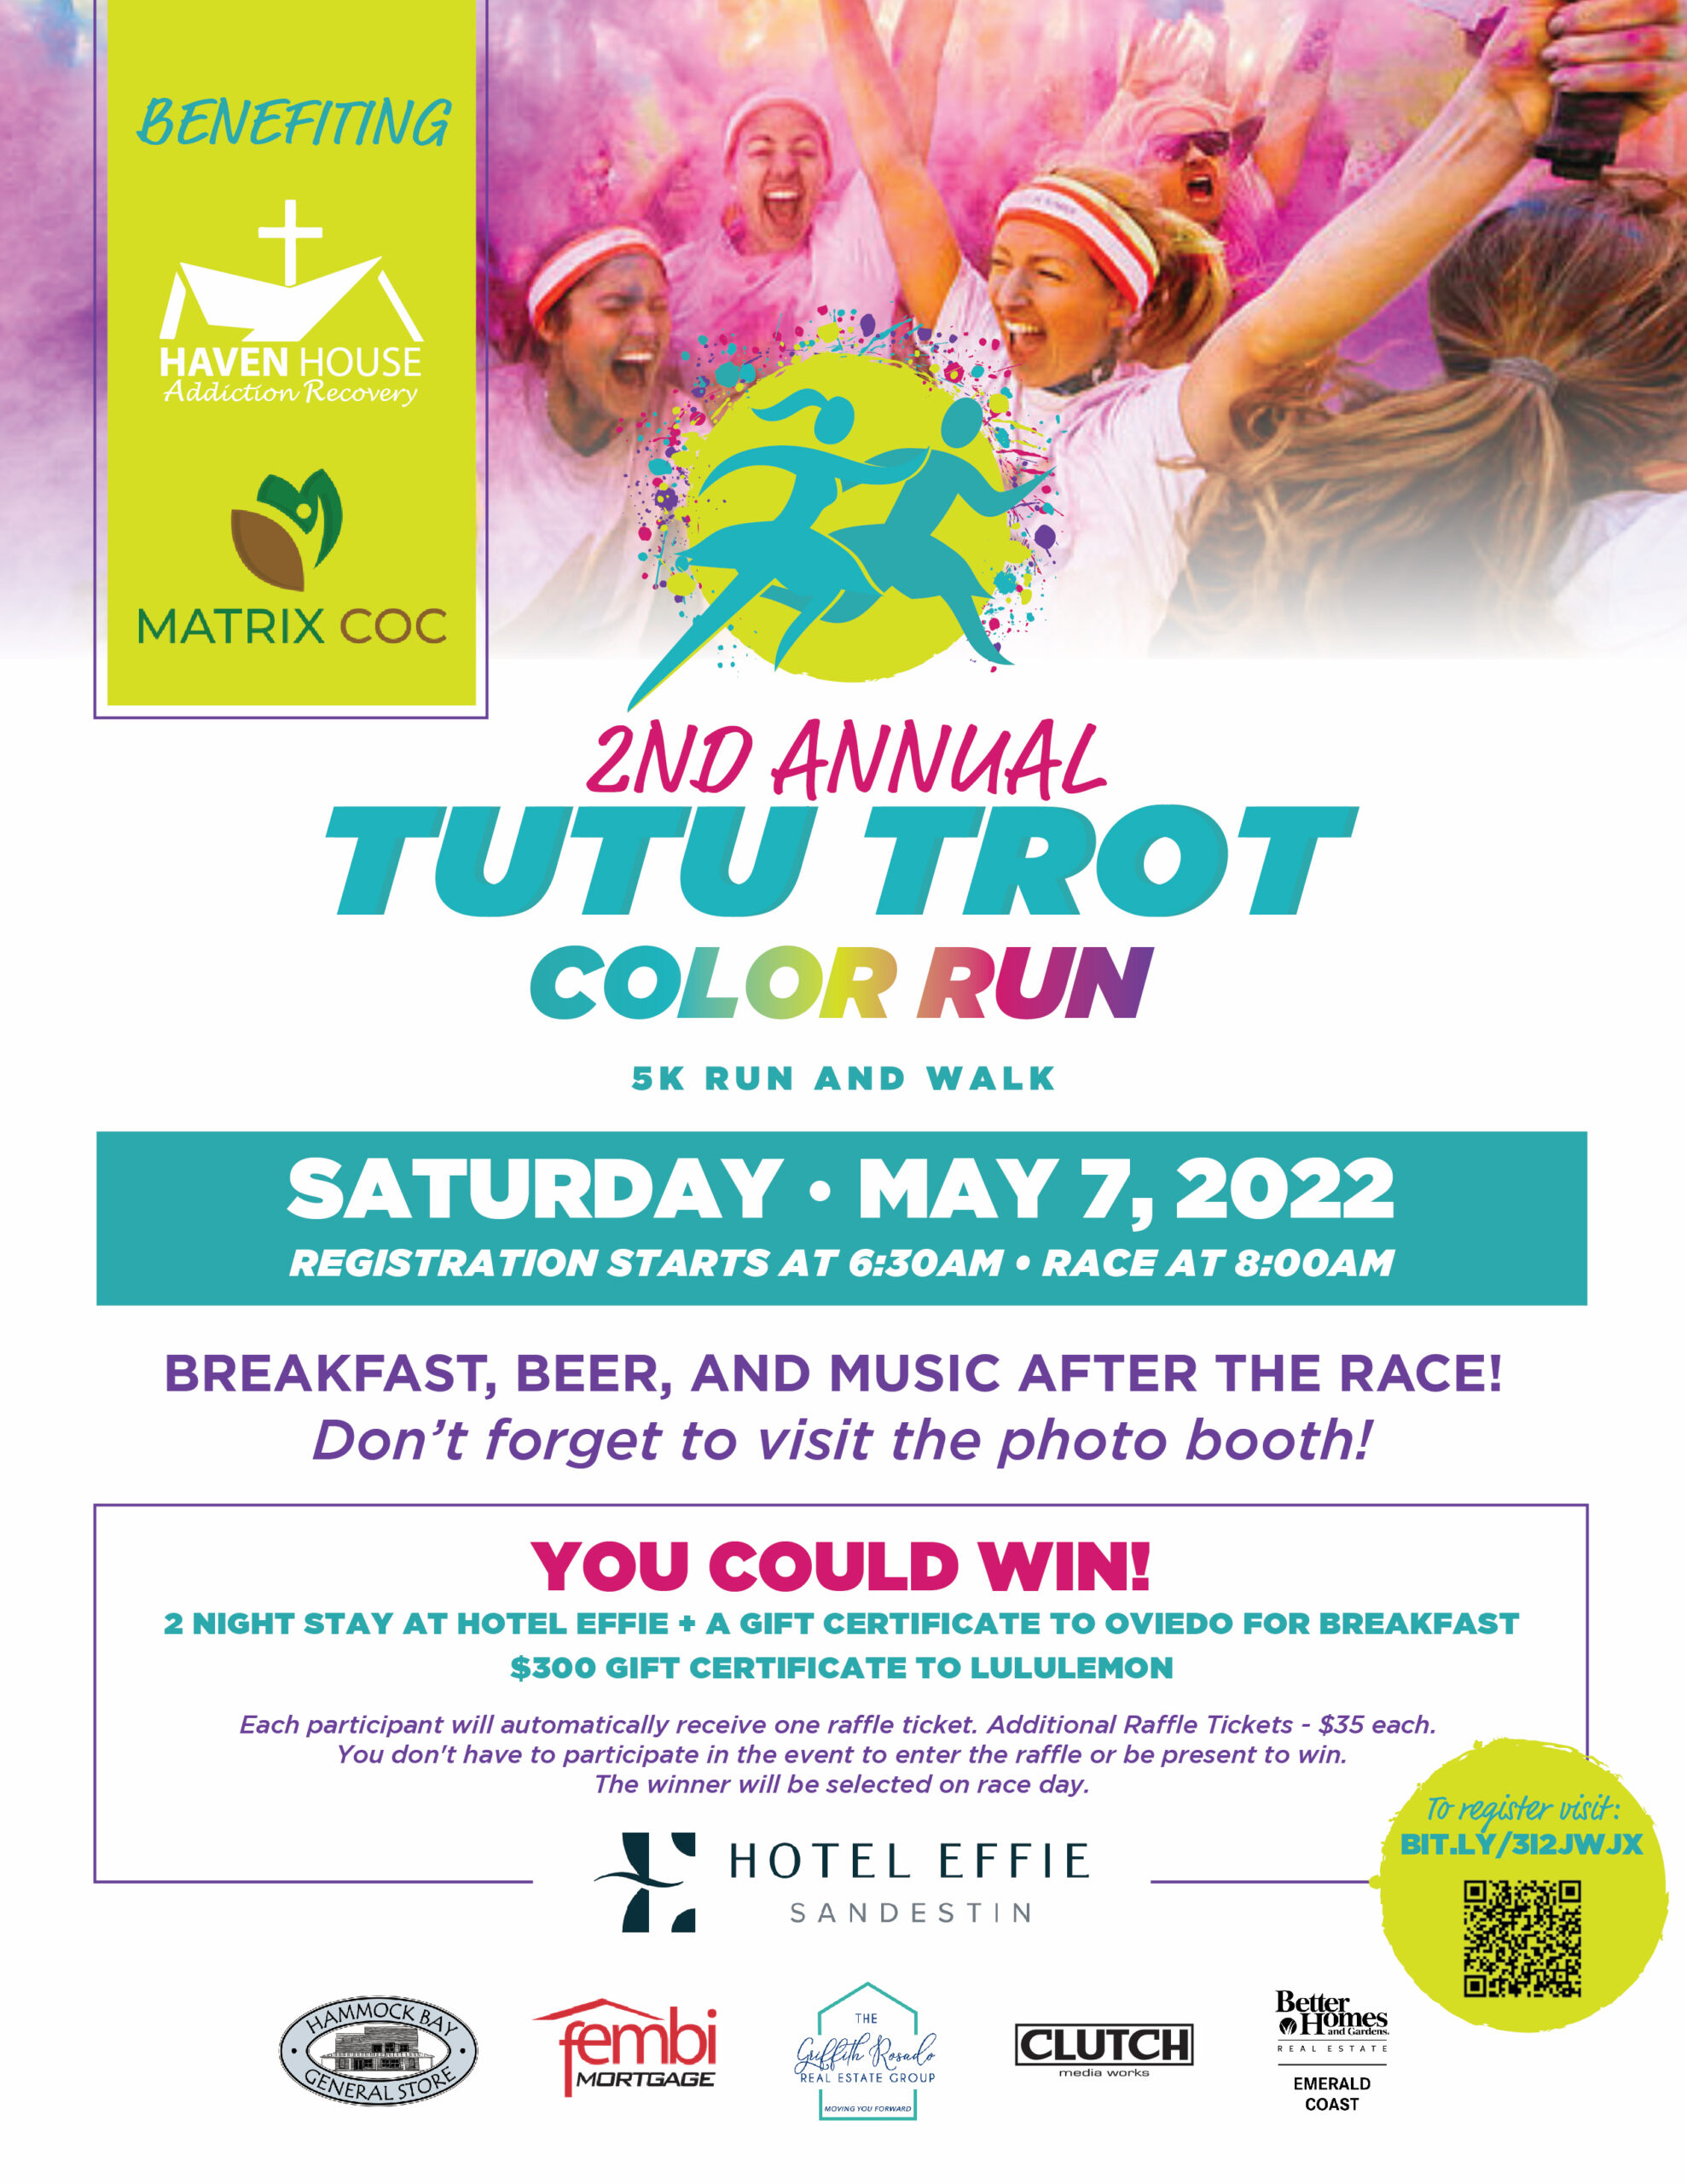 The 2nd Annual Tutu Trot 5k Color Run/Walk in Hammock Bay To Benefit Haven House and Matrix Community Outreach Center